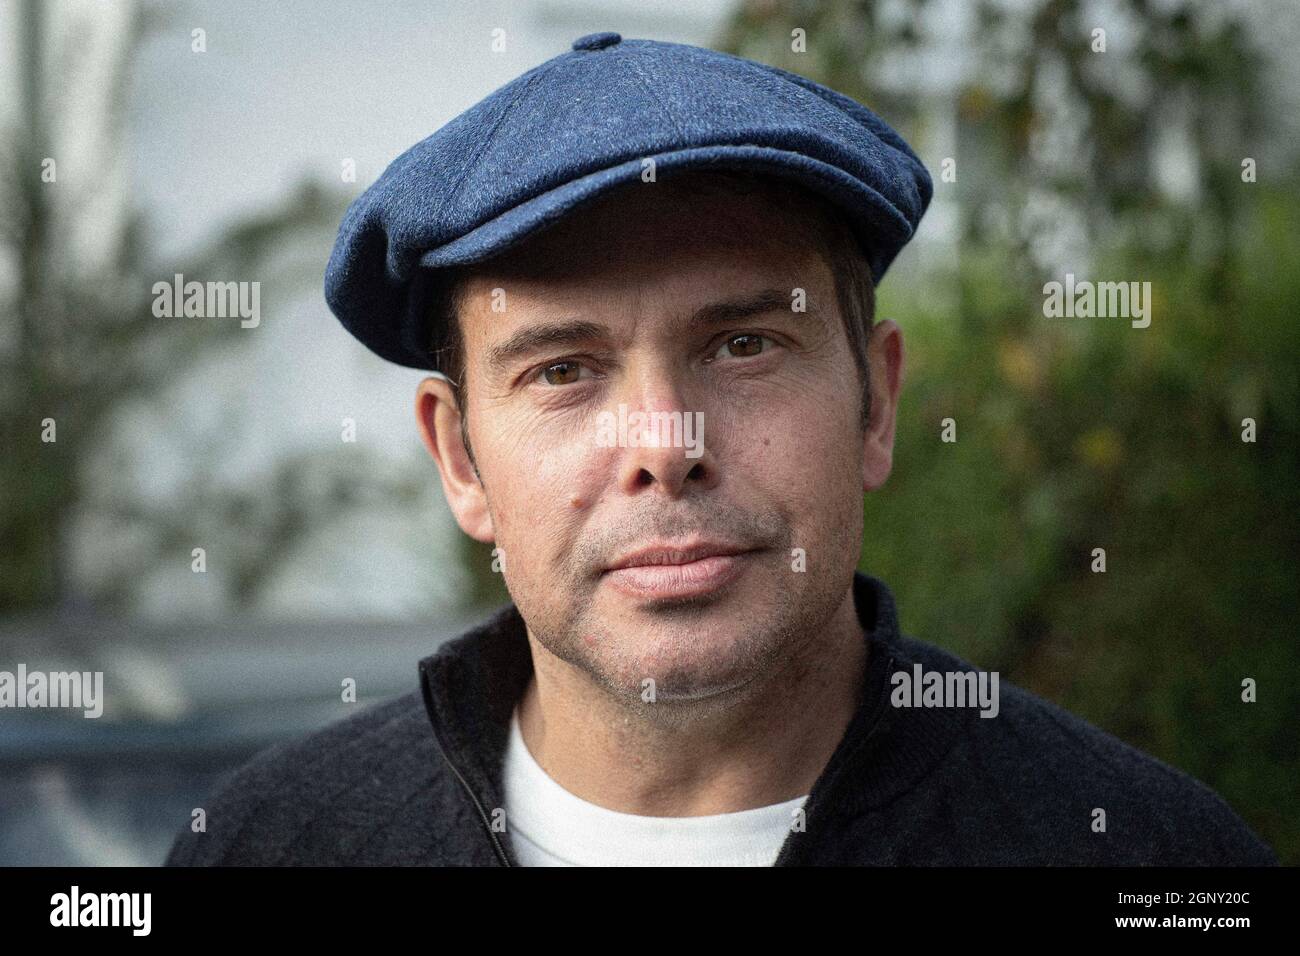 Portrait of good looking man with flat cap Stock Photo